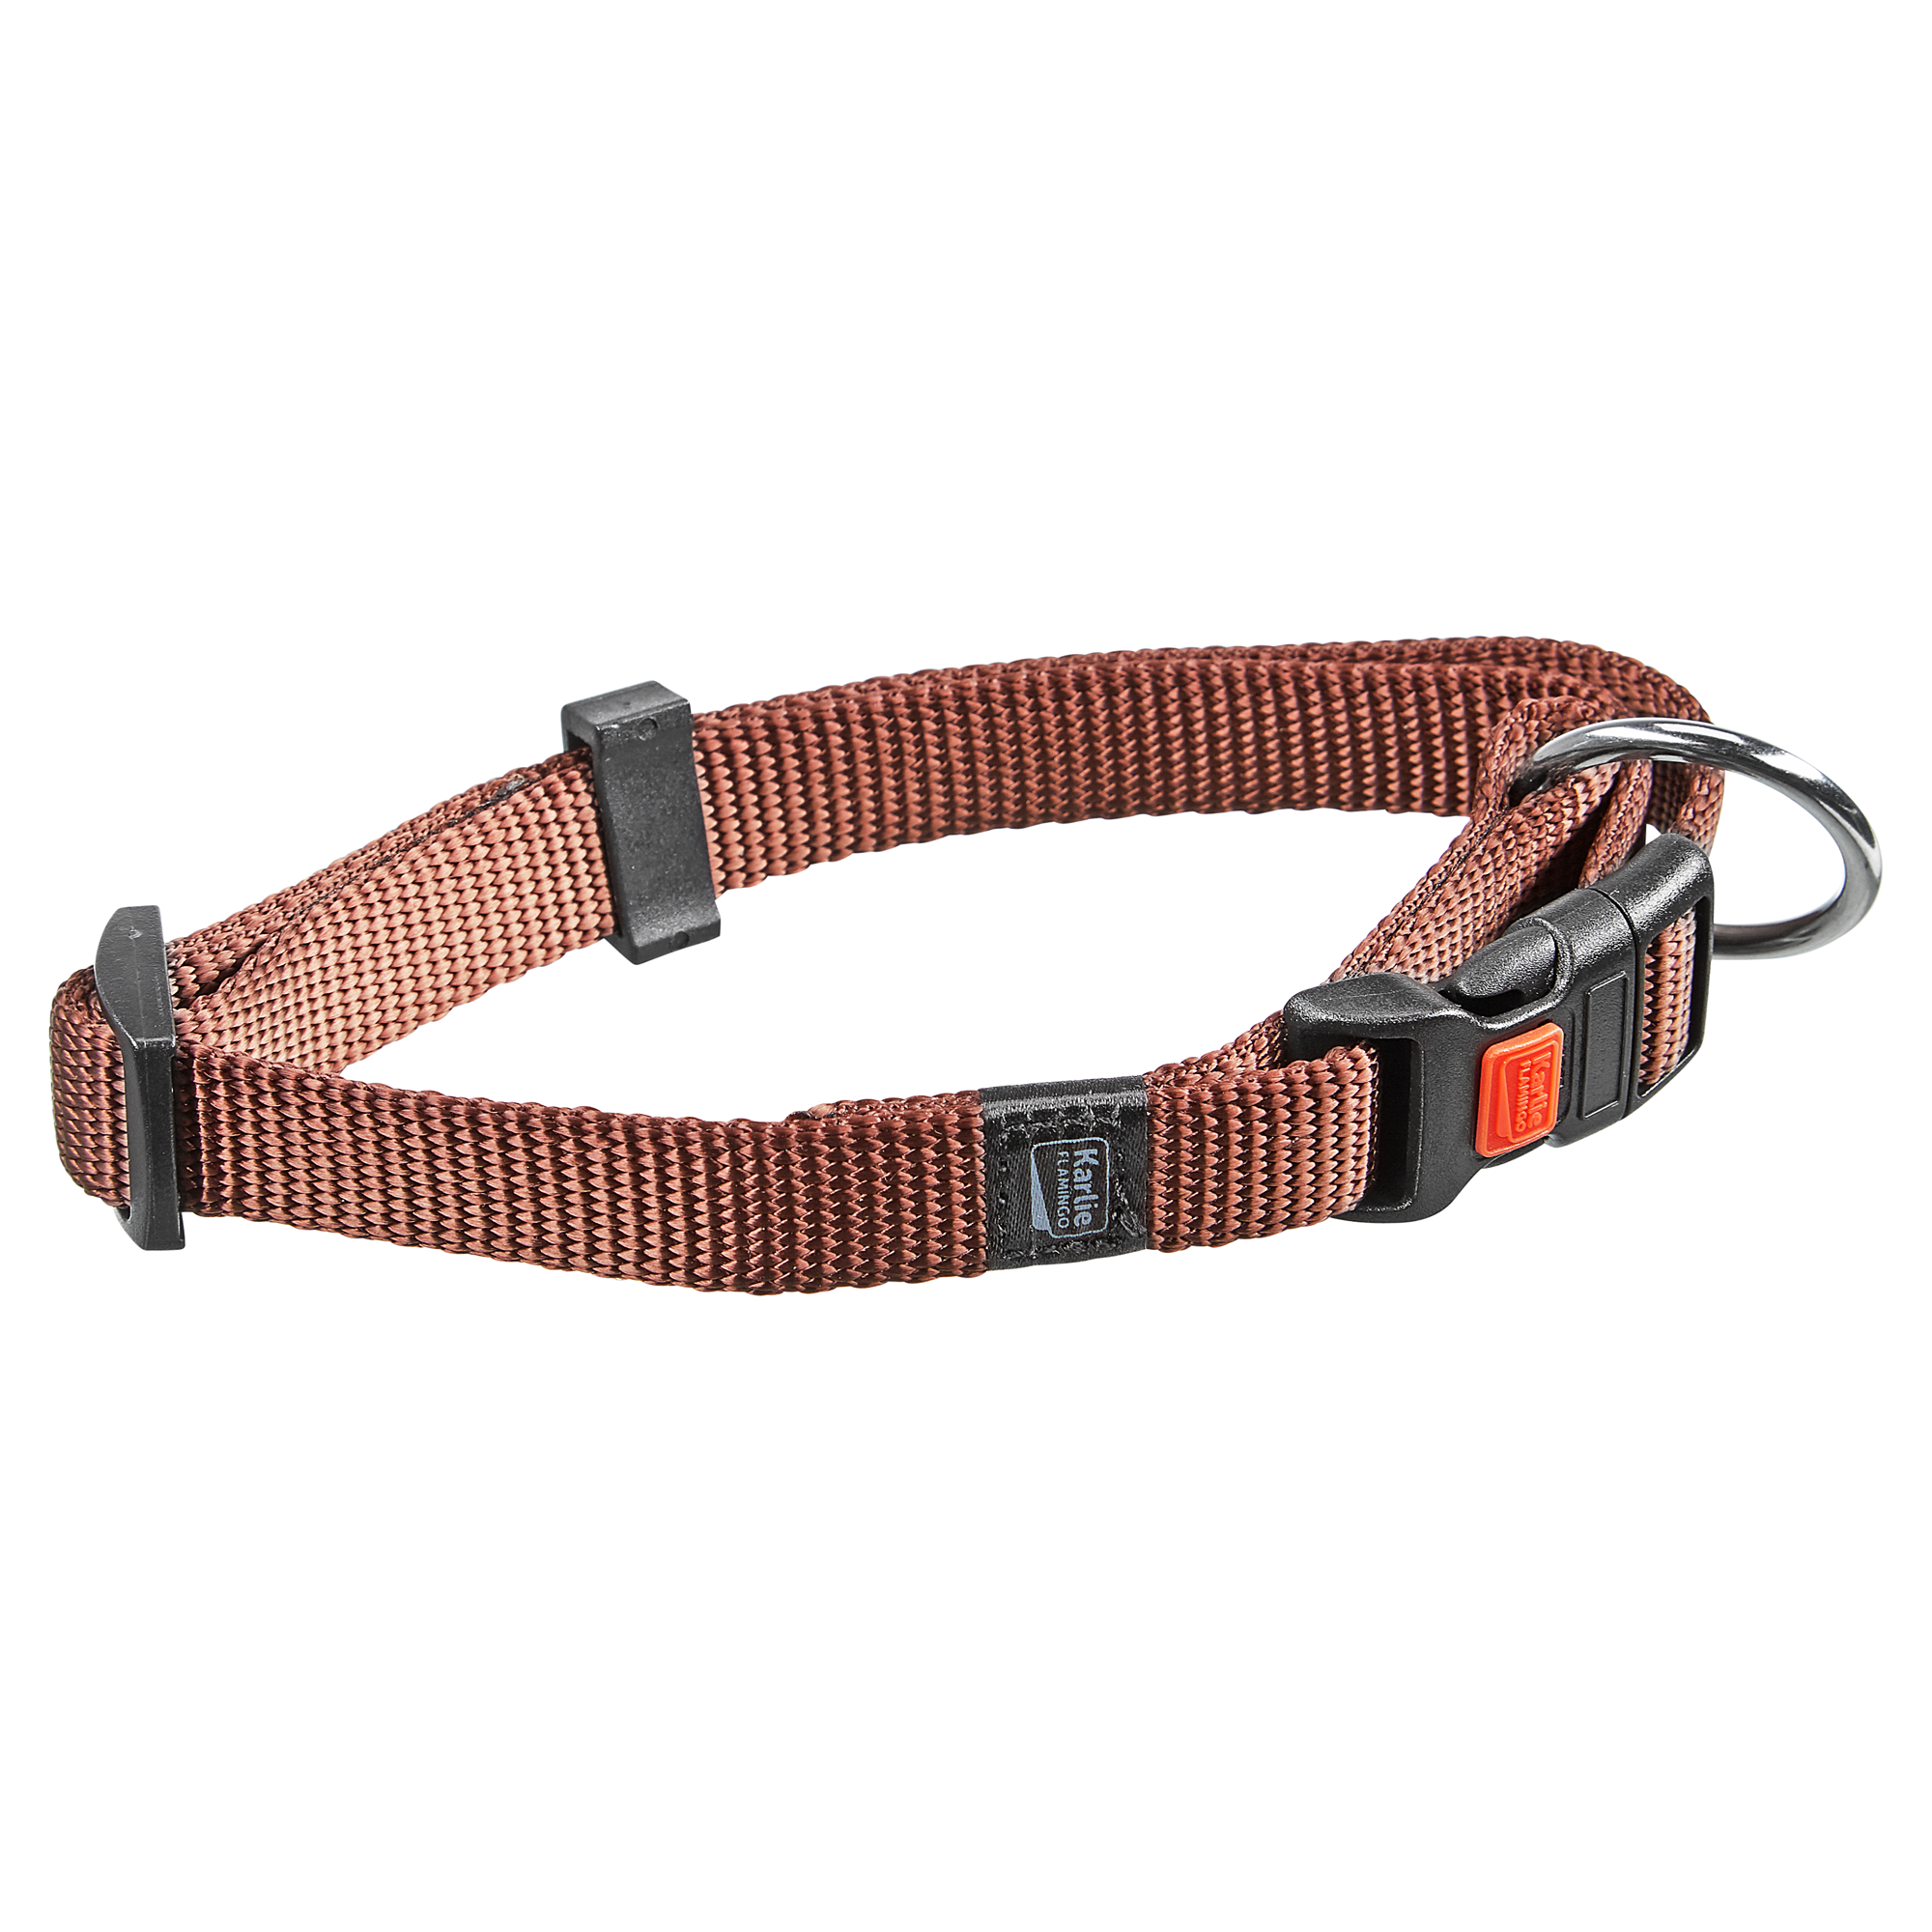 Hundehalsband braun 30 - 45 x 1,5 cm + product picture